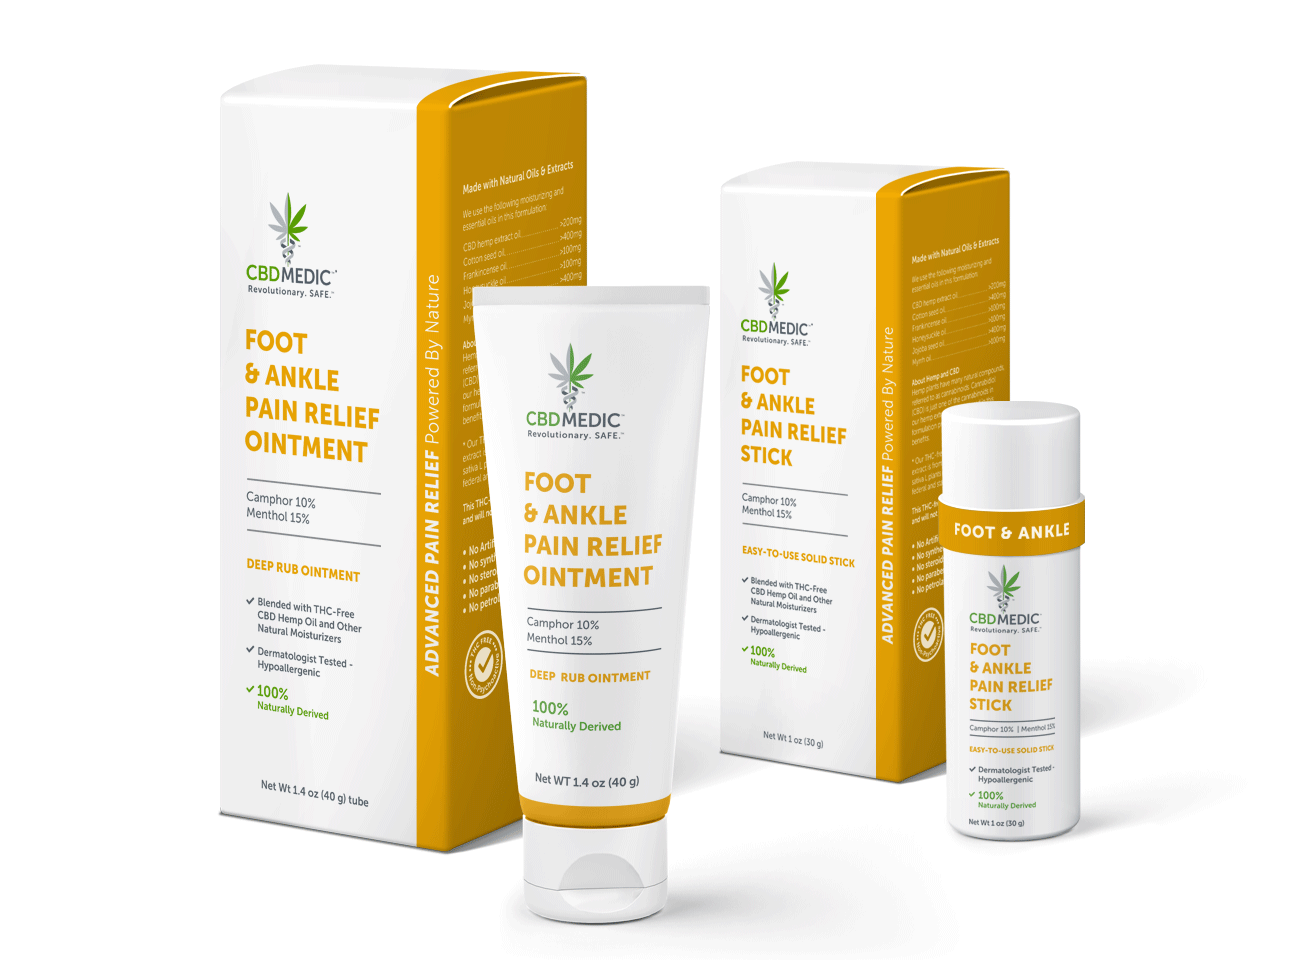 Foot & Ankle CBD Cream and Ointment - CBDMEDIC